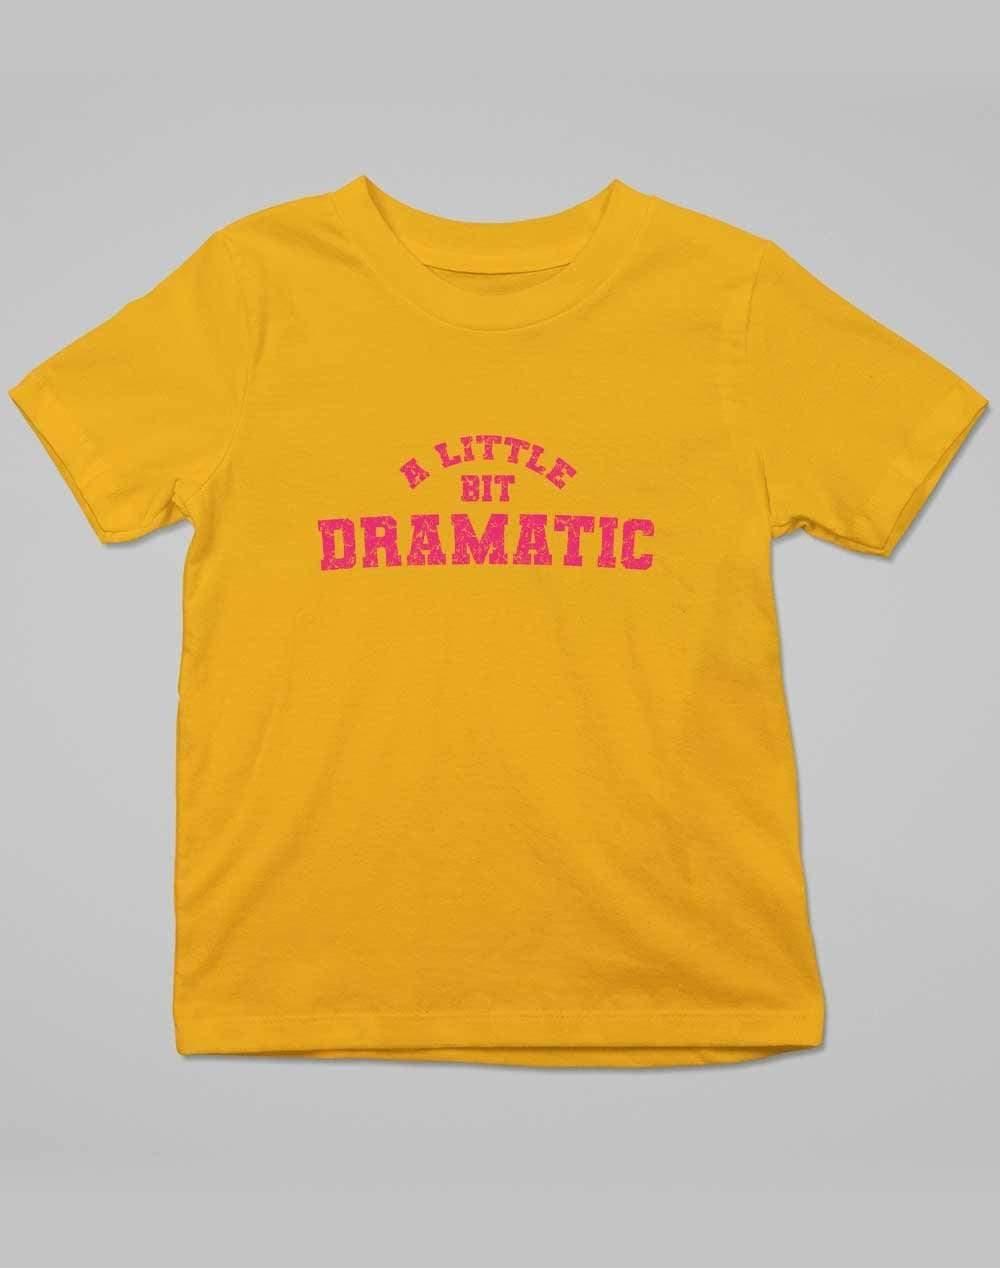 A Little Bit Dramatic Distressed Kids T-Shirt 3-4 years / Gold  - Off World Tees